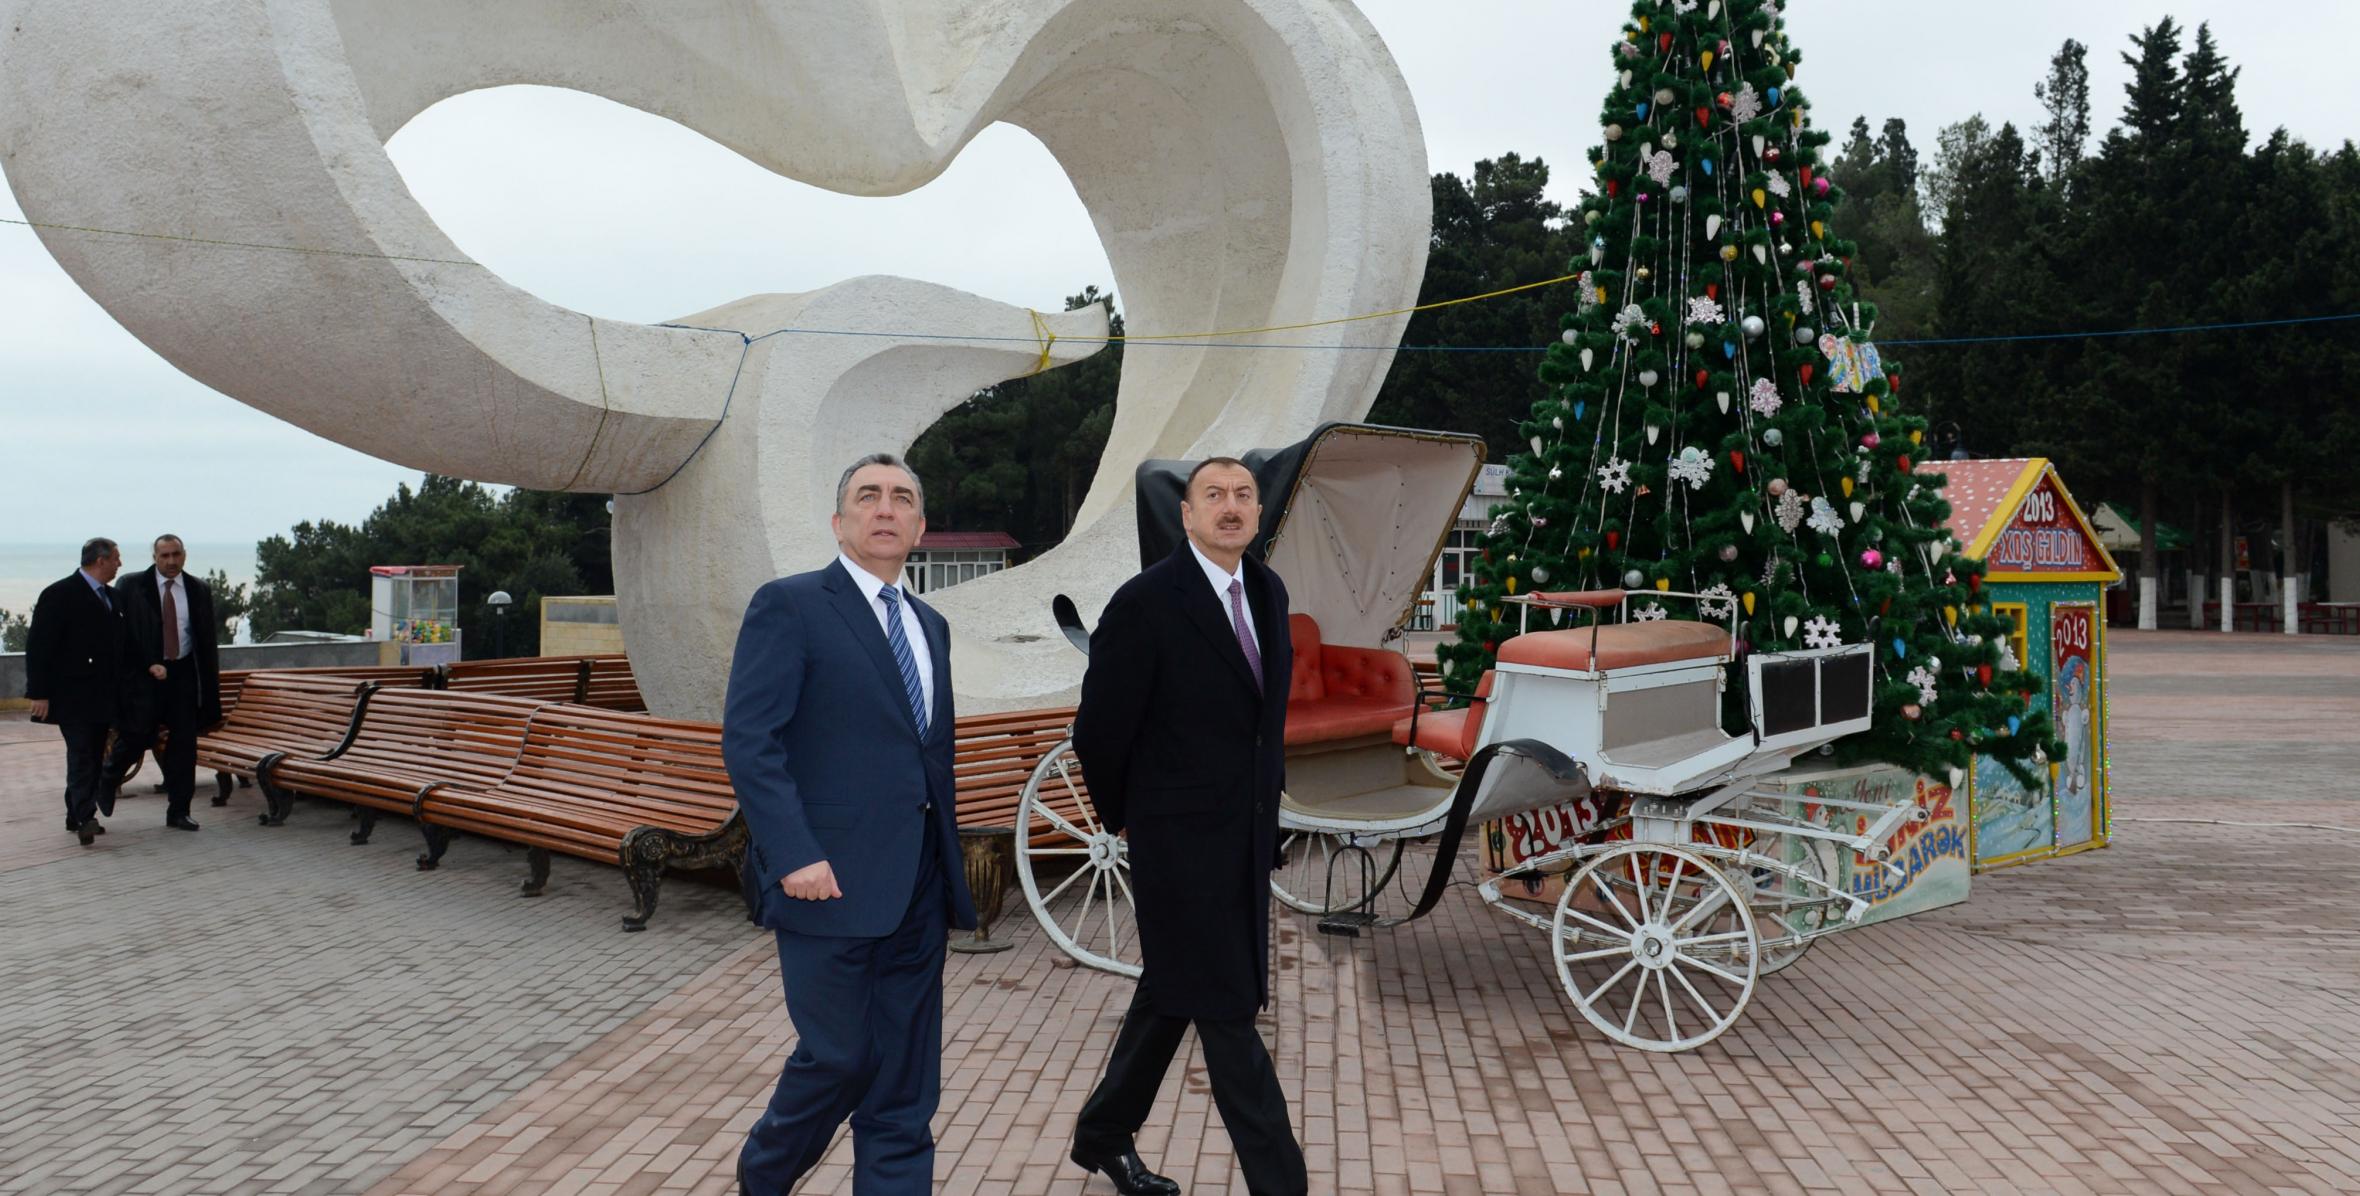 Ilham Aliyev reviewed the progress of reconstruction and landscaping in the Nasimi Culture and Recreation Park in Sumgayit